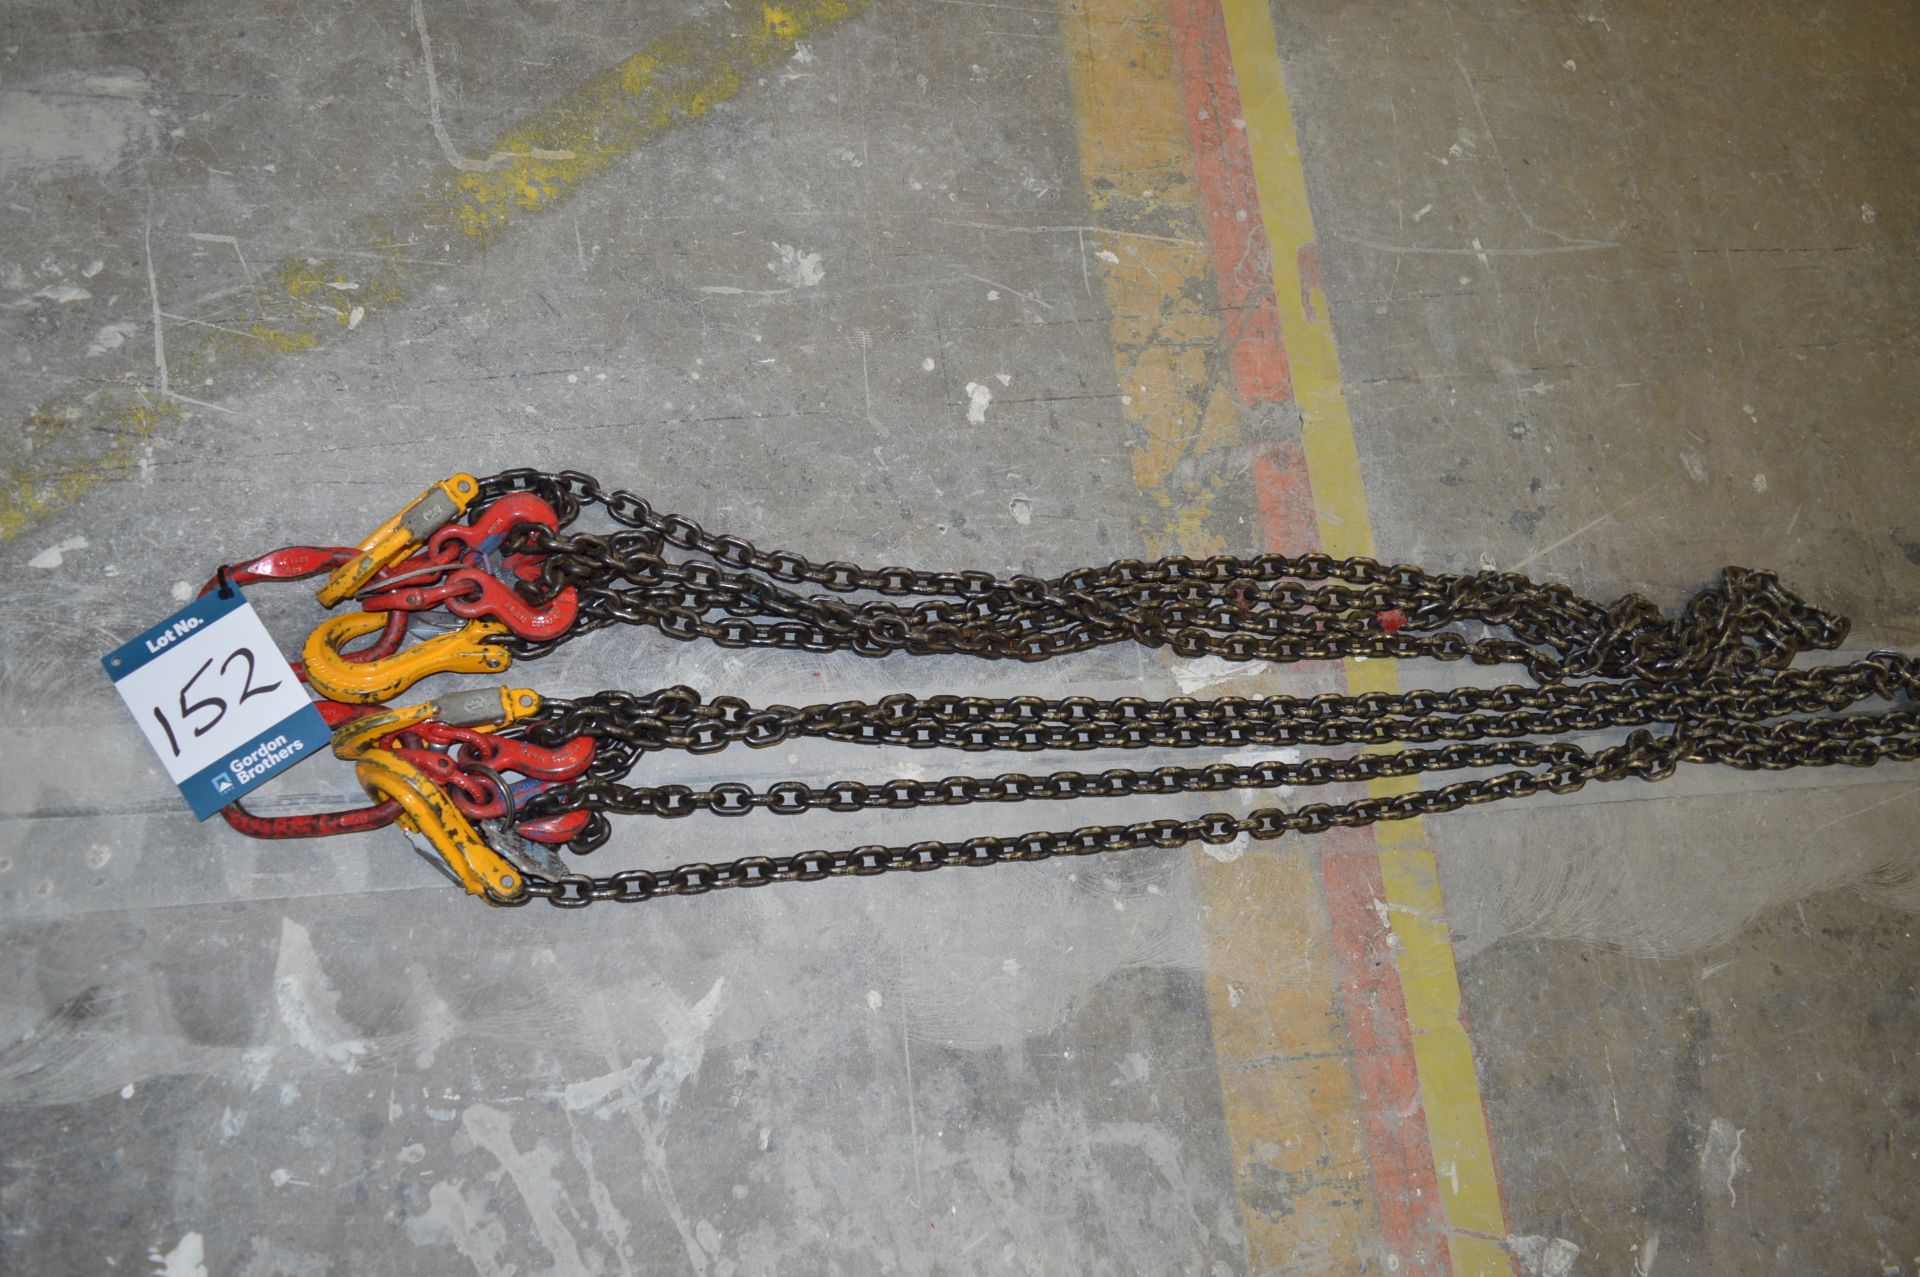 2x (no.) two leg lifting chains, each with shorteners